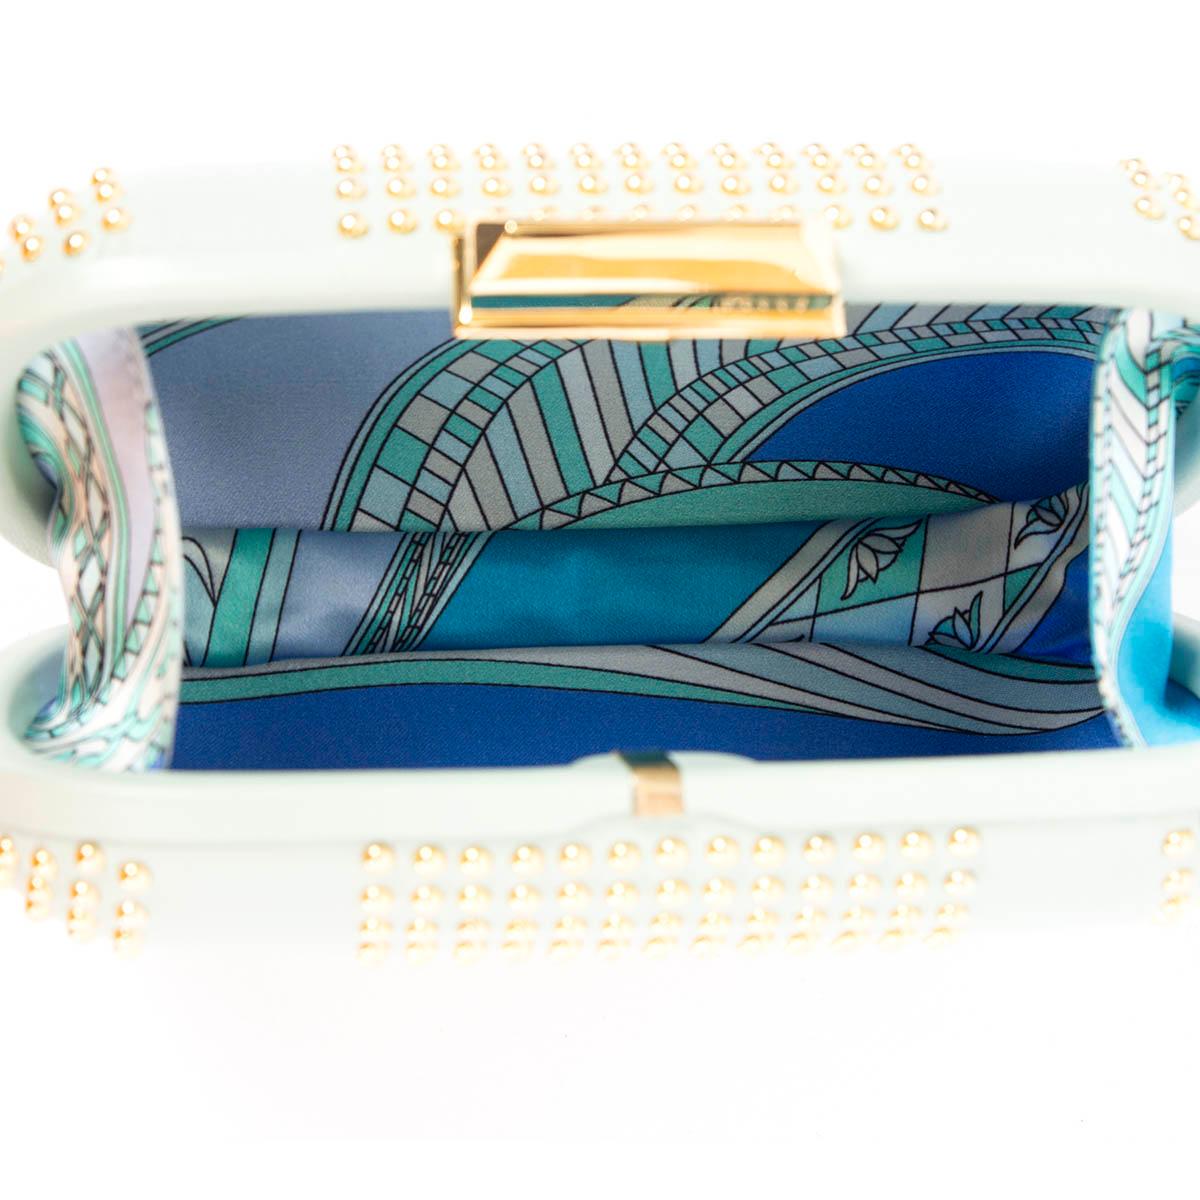 Gray EMILIO PUCCI minor green leather STUDDED BOX Clutch Bag For Sale